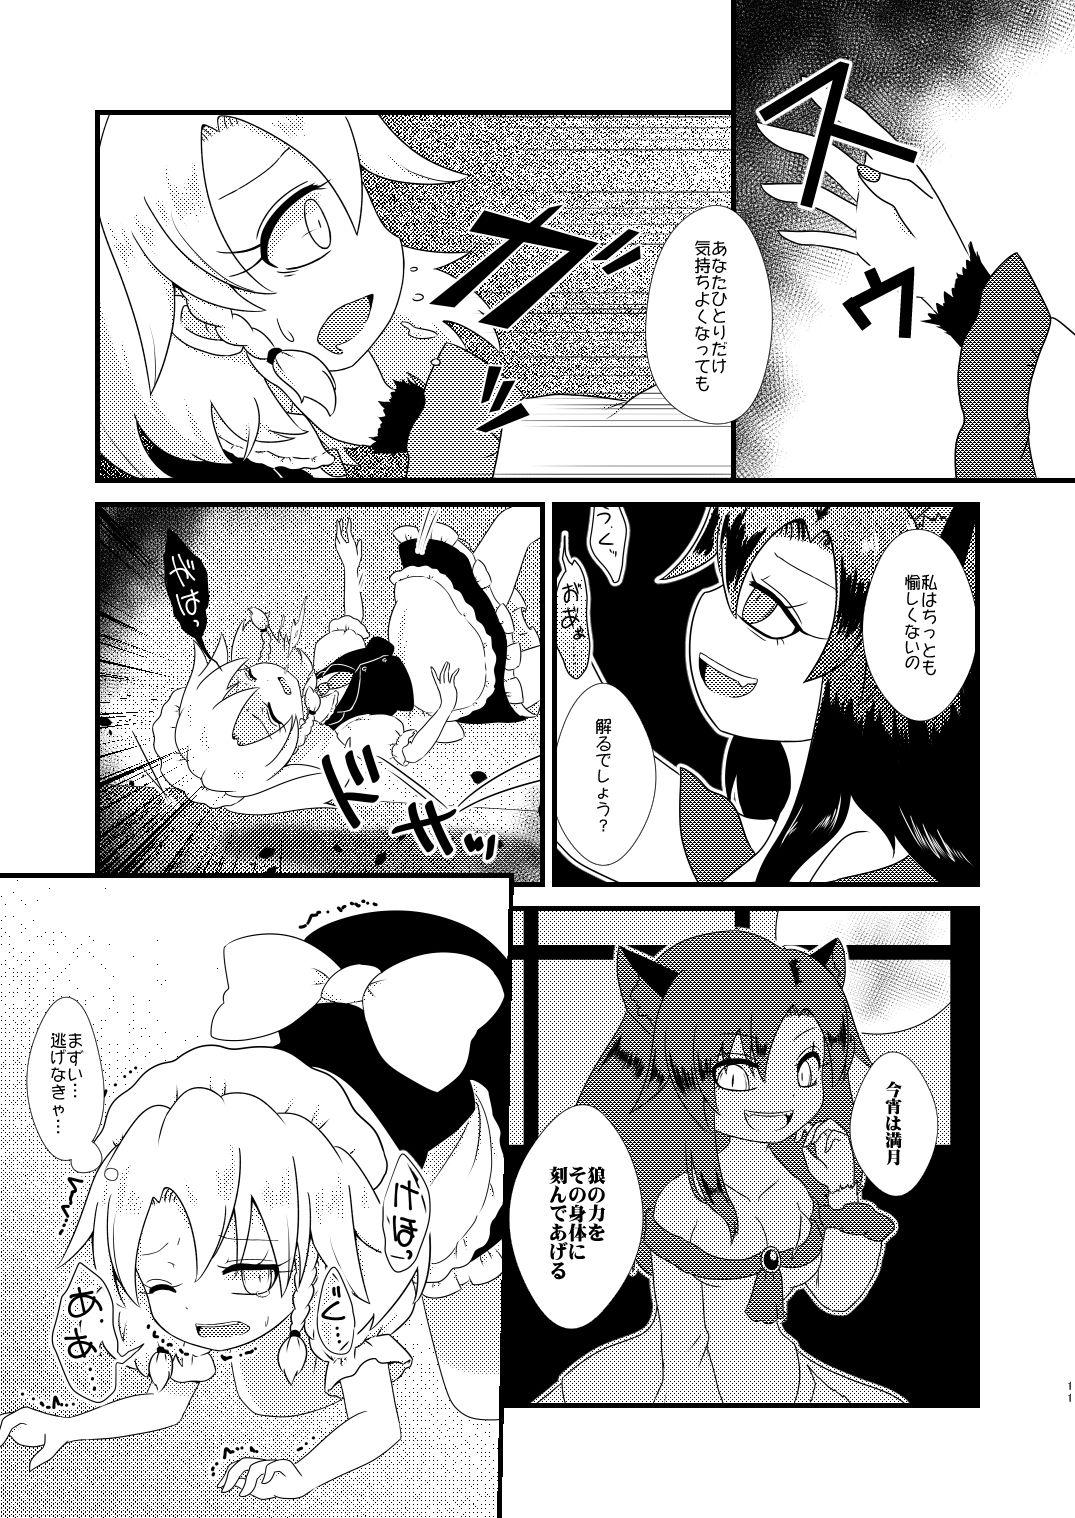 Abuse ルーディ・リリー - Touhou project This - Page 10